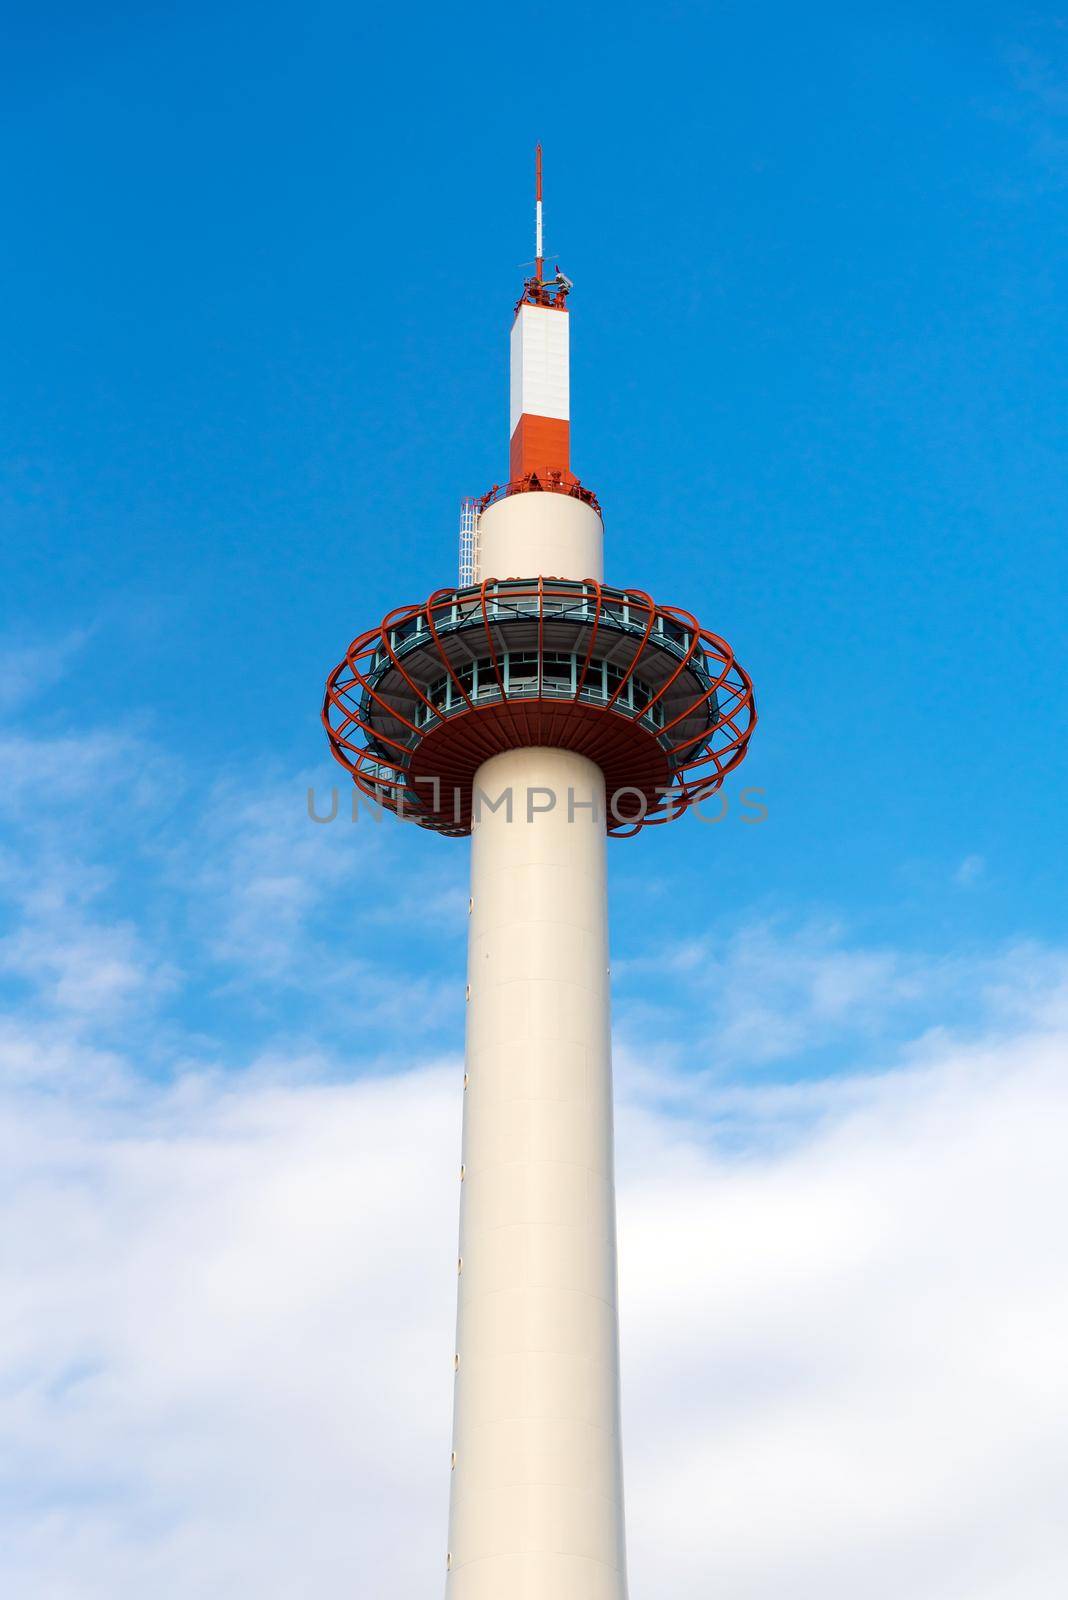 Kyoto Tower the tallest structure in Kyoto,Japan by Nuamfolio